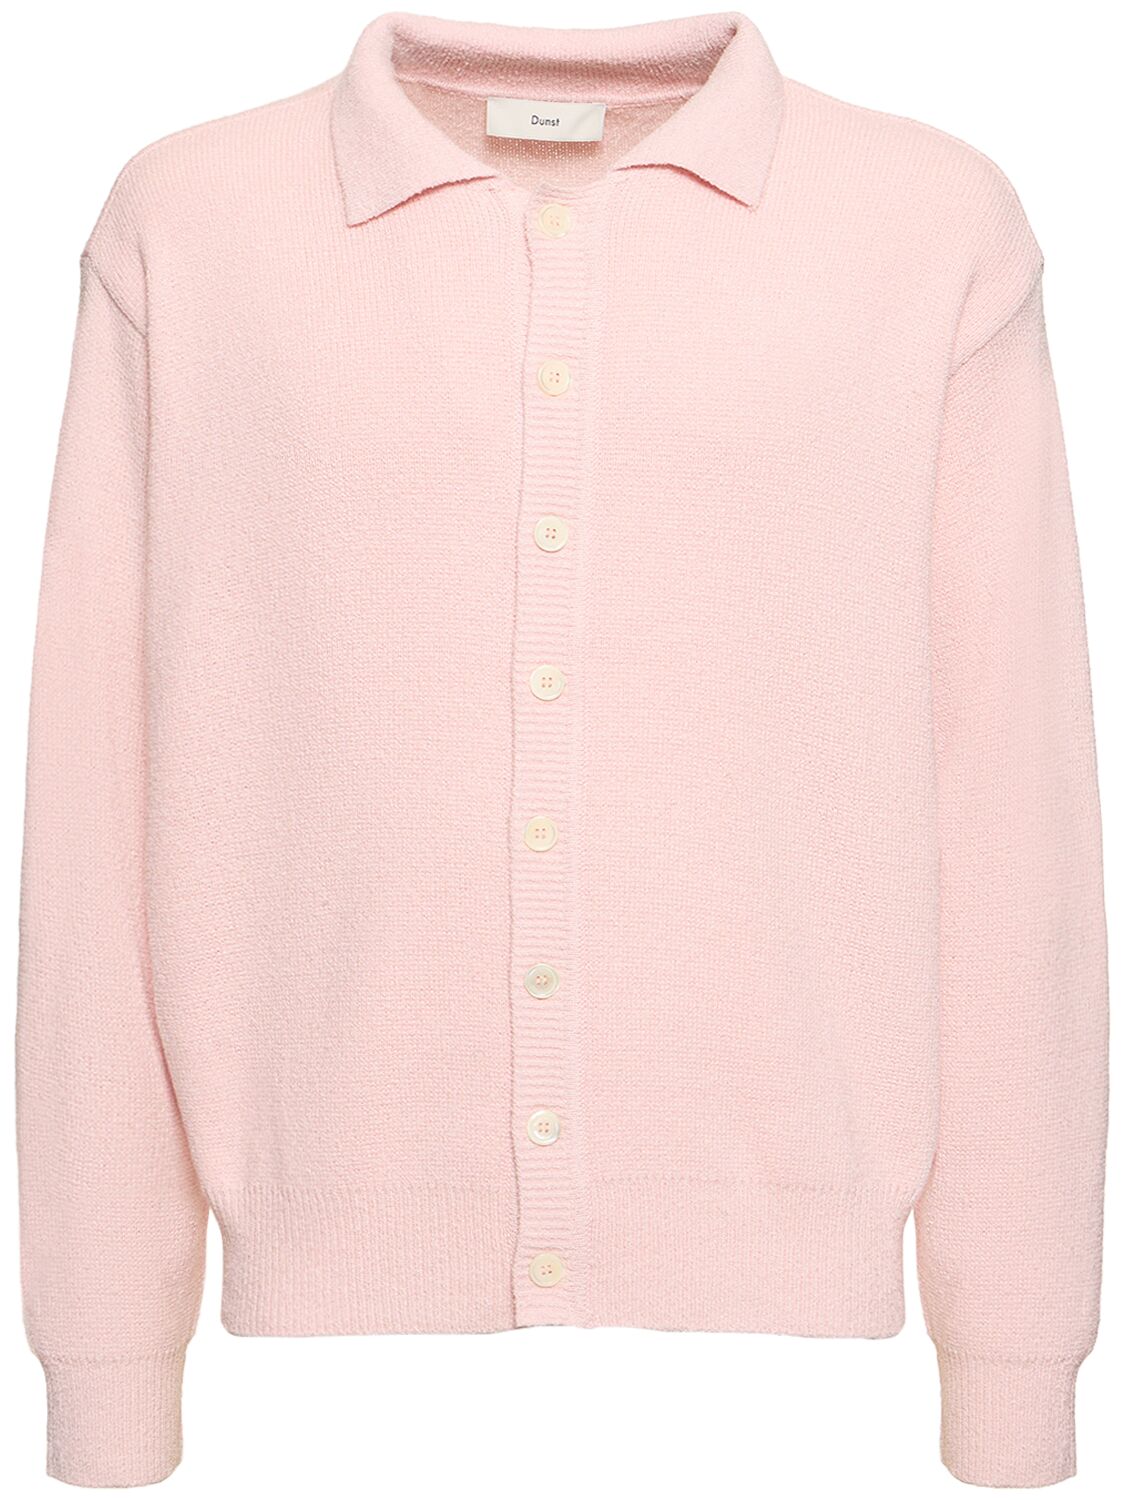 Dunst Open Collar Knitted Cardigan In Light Pink